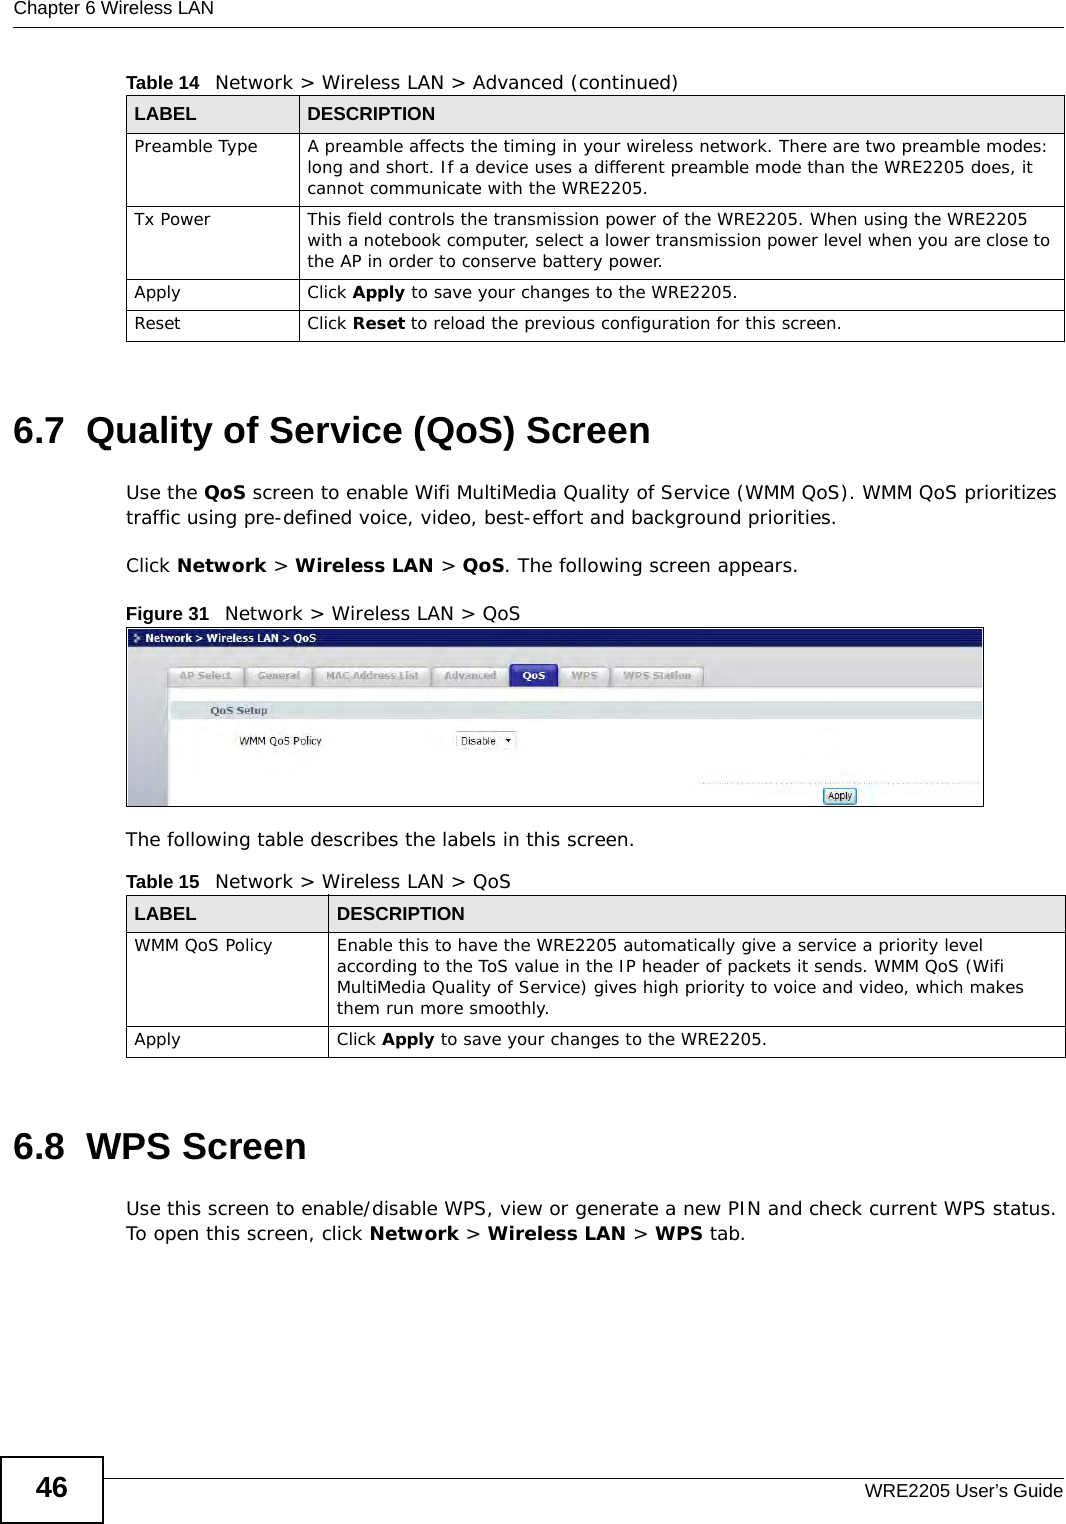 Chapter 6 Wireless LANWRE2205 User’s Guide466.7  Quality of Service (QoS) ScreenUse the QoS screen to enable Wifi MultiMedia Quality of Service (WMM QoS). WMM QoS prioritizes traffic using pre-defined voice, video, best-effort and background priorities.Click Network &gt; Wireless LAN &gt; QoS. The following screen appears.Figure 31   Network &gt; Wireless LAN &gt; QoS The following table describes the labels in this screen. 6.8  WPS ScreenUse this screen to enable/disable WPS, view or generate a new PIN and check current WPS status. To open this screen, click Network &gt; Wireless LAN &gt; WPS tab.Preamble Type A preamble affects the timing in your wireless network. There are two preamble modes: long and short. If a device uses a different preamble mode than the WRE2205 does, it cannot communicate with the WRE2205.Tx Power This field controls the transmission power of the WRE2205. When using the WRE2205 with a notebook computer, select a lower transmission power level when you are close to the AP in order to conserve battery power.Apply Click Apply to save your changes to the WRE2205.Reset Click Reset to reload the previous configuration for this screen.Table 14   Network &gt; Wireless LAN &gt; Advanced (continued)LABEL DESCRIPTIONTable 15   Network &gt; Wireless LAN &gt; QoSLABEL DESCRIPTIONWMM QoS Policy Enable this to have the WRE2205 automatically give a service a priority level according to the ToS value in the IP header of packets it sends. WMM QoS (Wifi MultiMedia Quality of Service) gives high priority to voice and video, which makes them run more smoothly.Apply Click Apply to save your changes to the WRE2205.